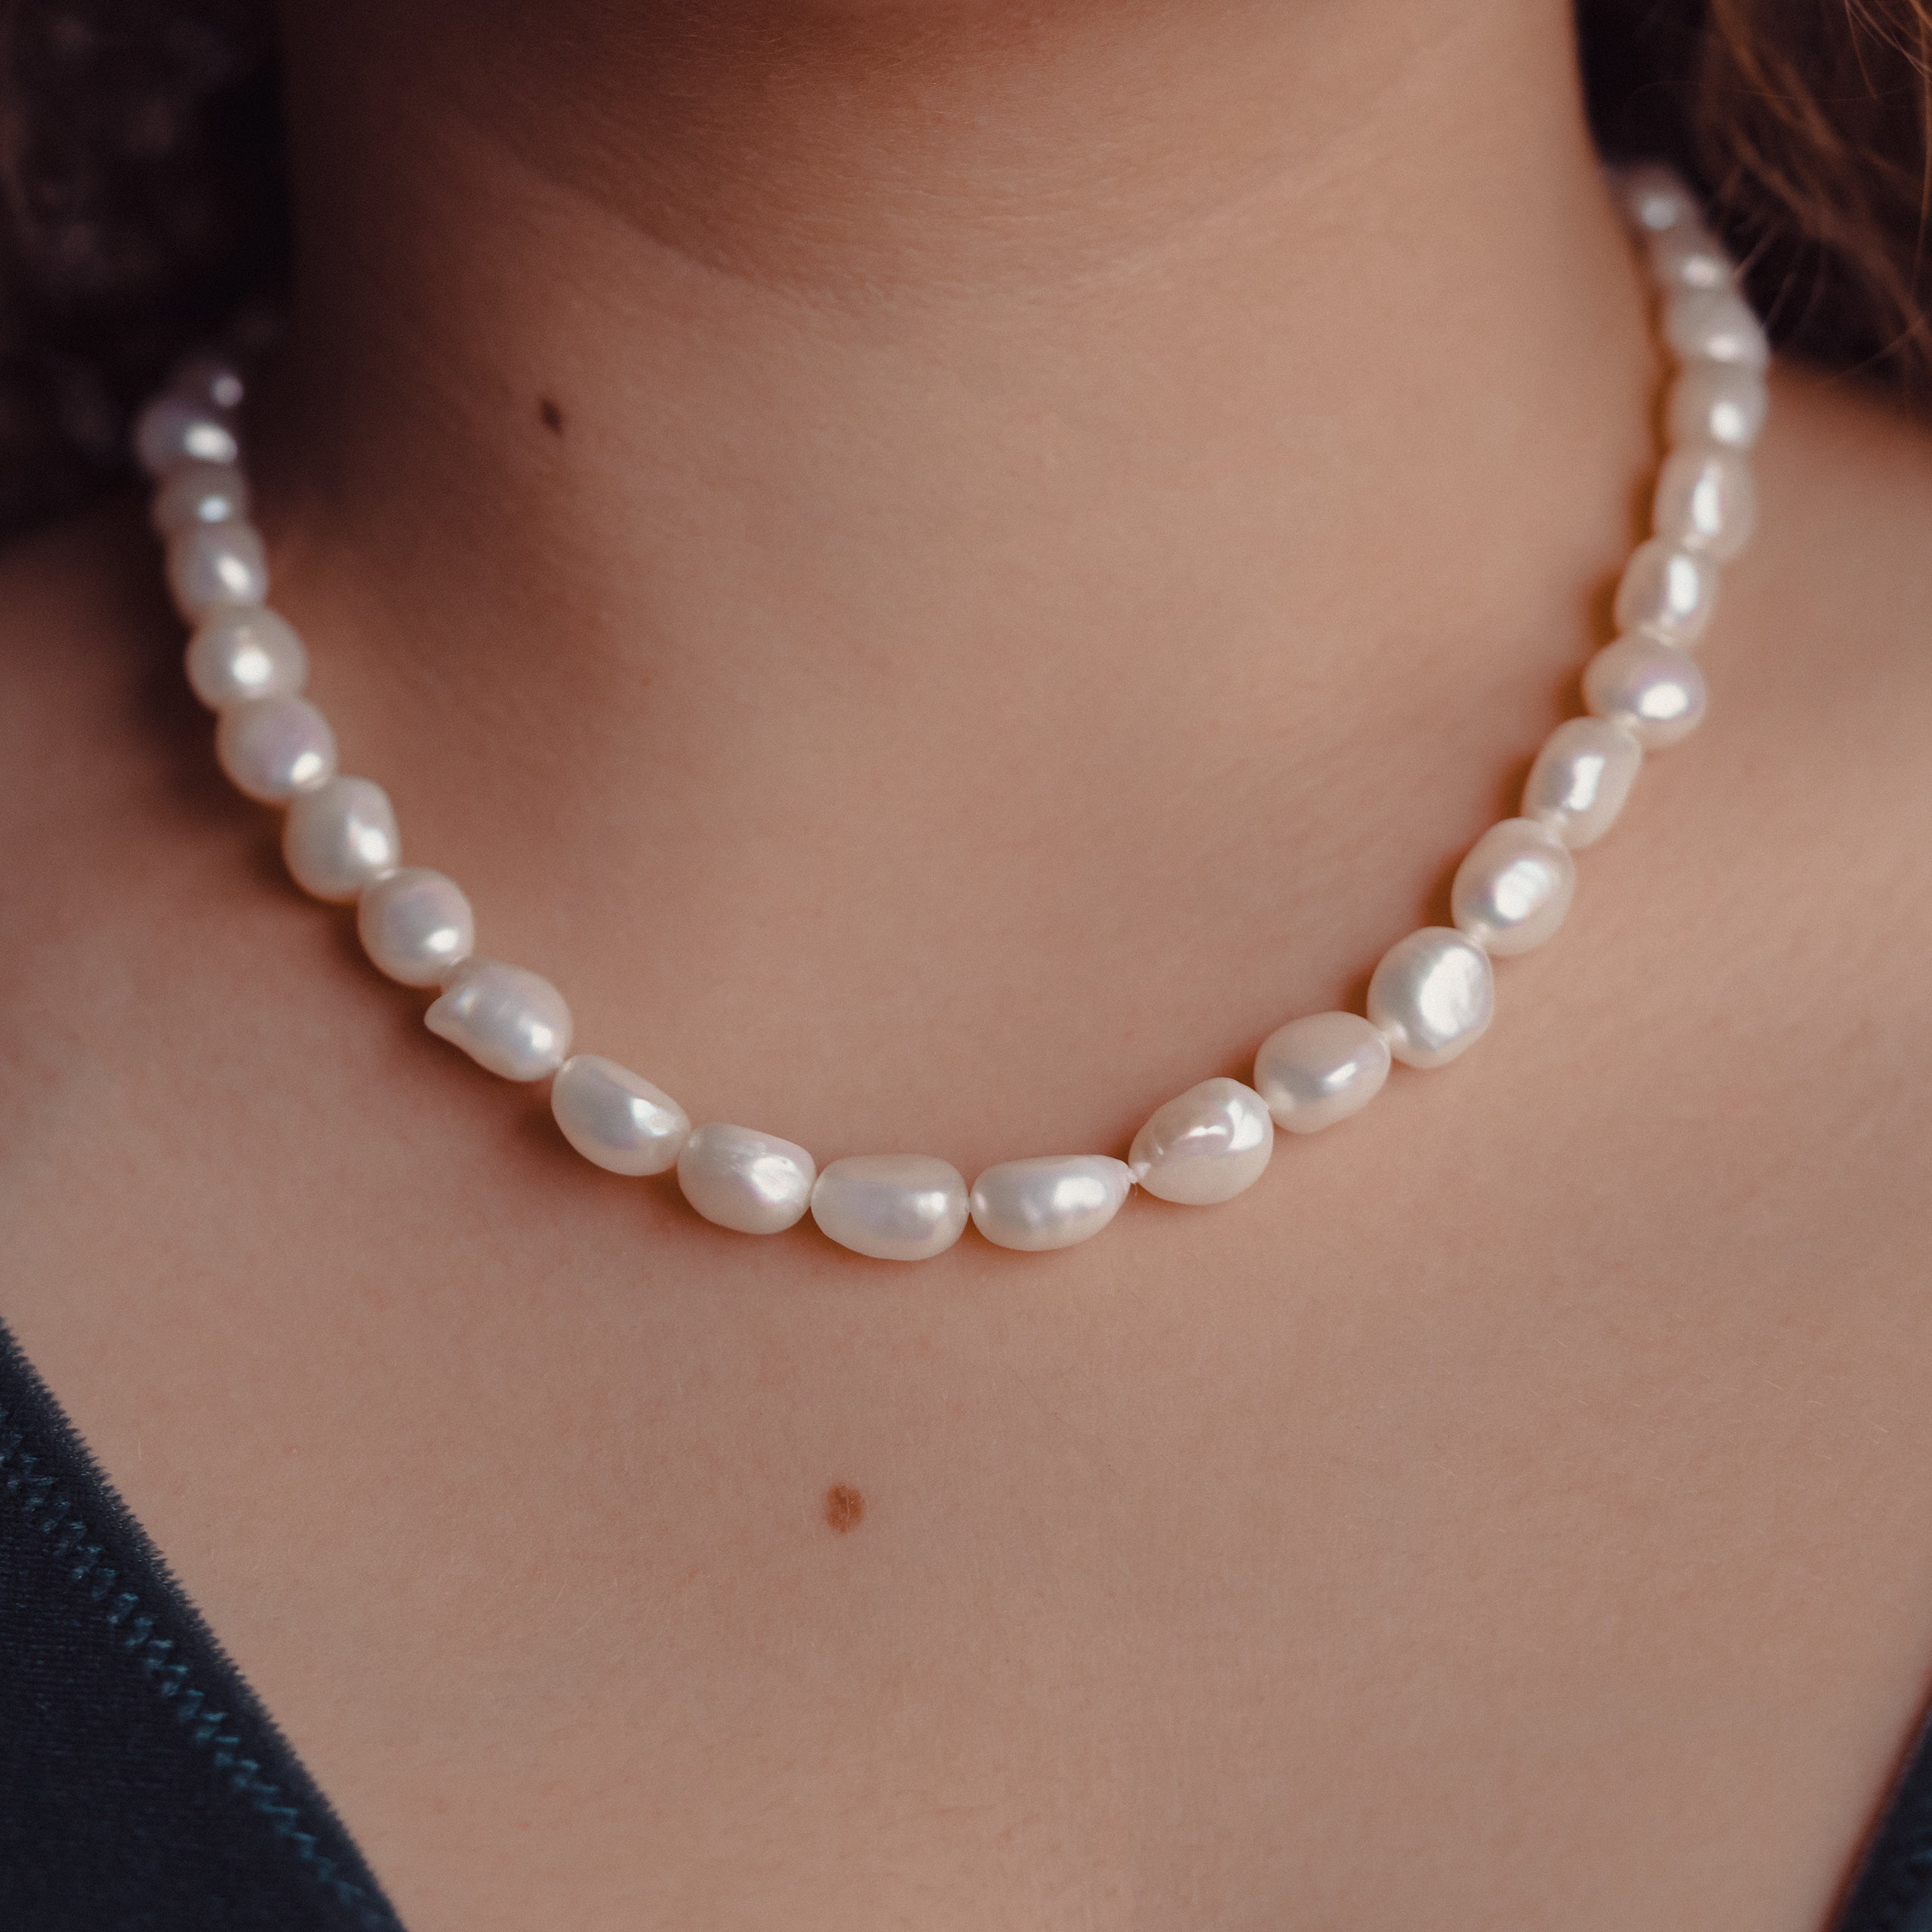 Baroque Cultured Pearl Necklace, Bracelet and Earrings Set